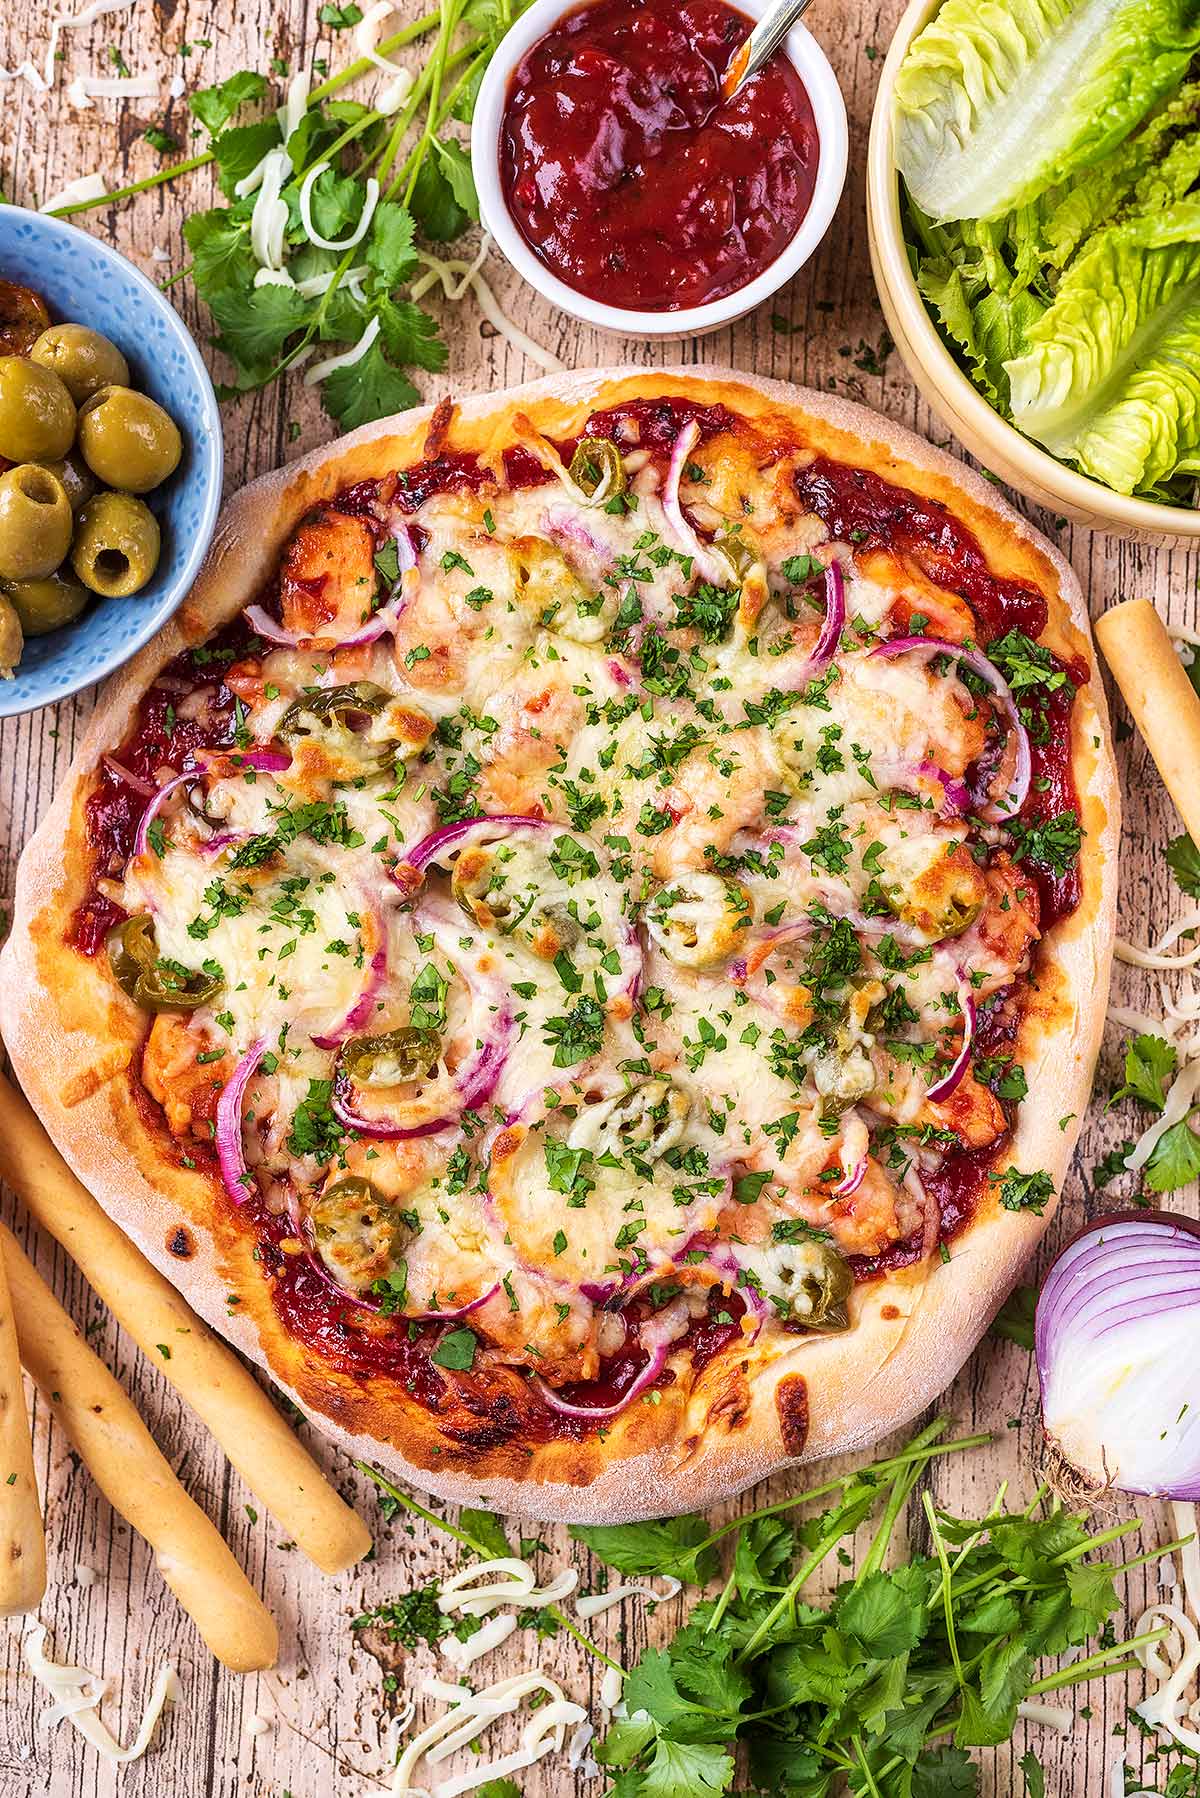 A thick crust pizza surrounded by salad, olives, bread sticks, herbs and dip